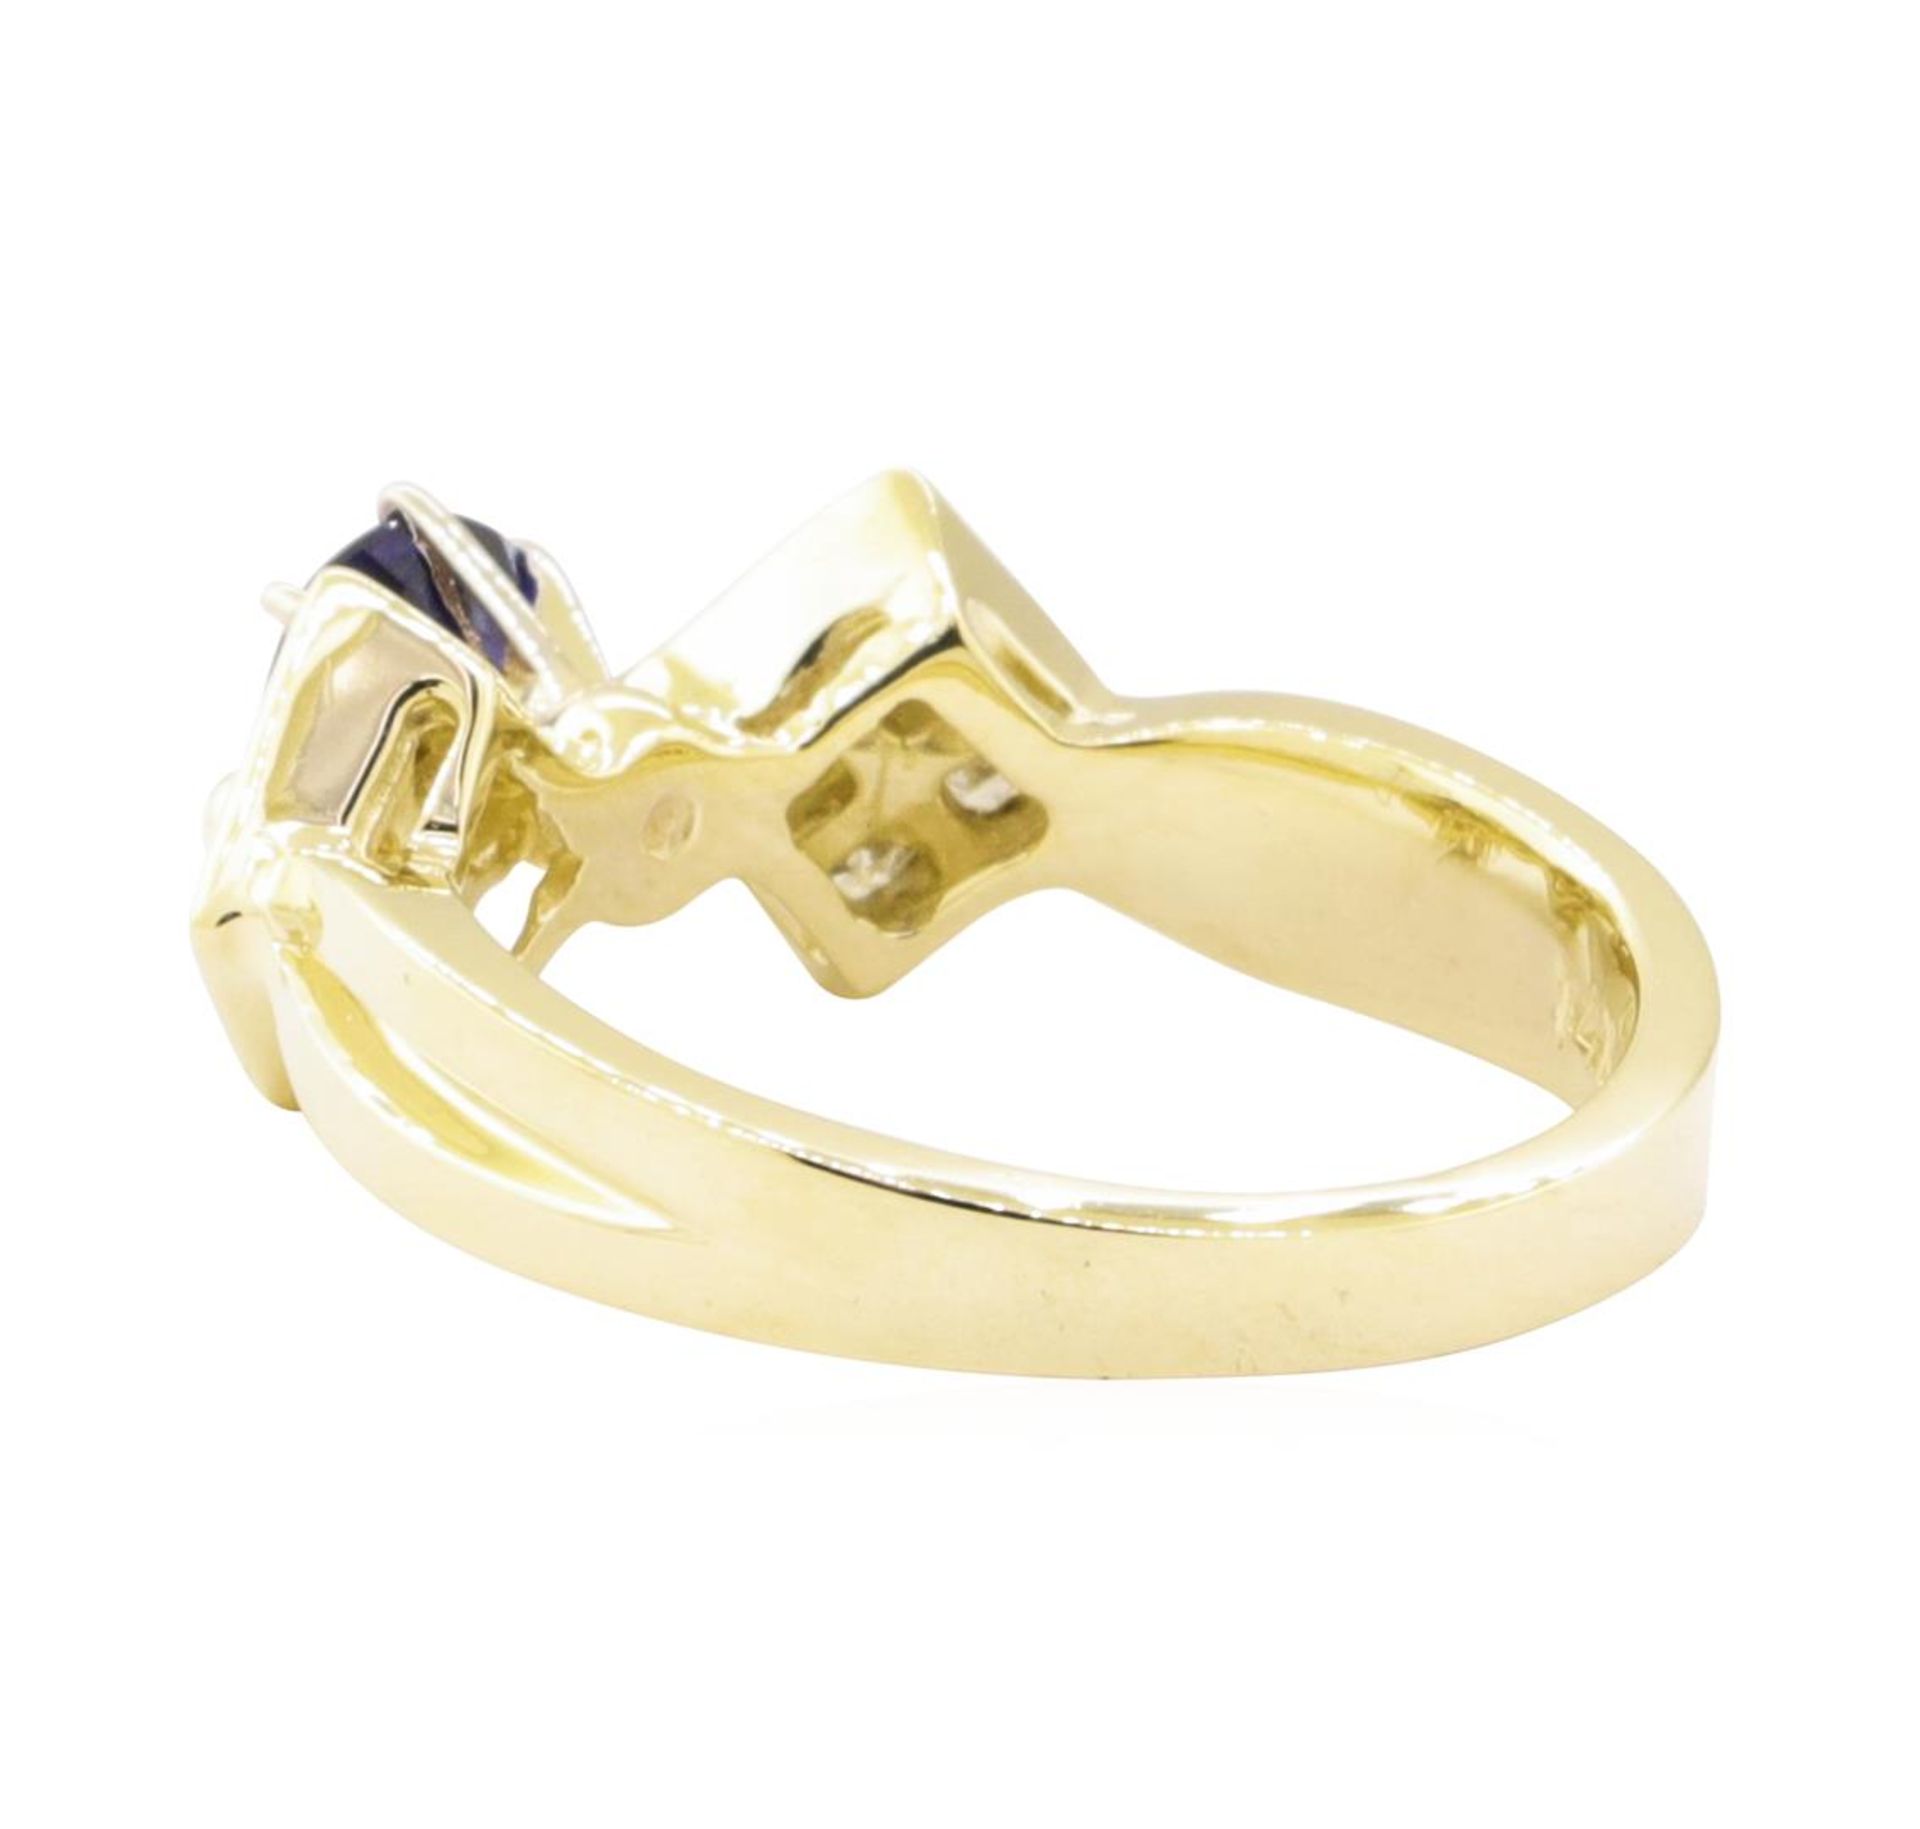 1.02 ctw Blue Sapphire and Diamond Ring - 14KT Yellow Gold - Image 3 of 4